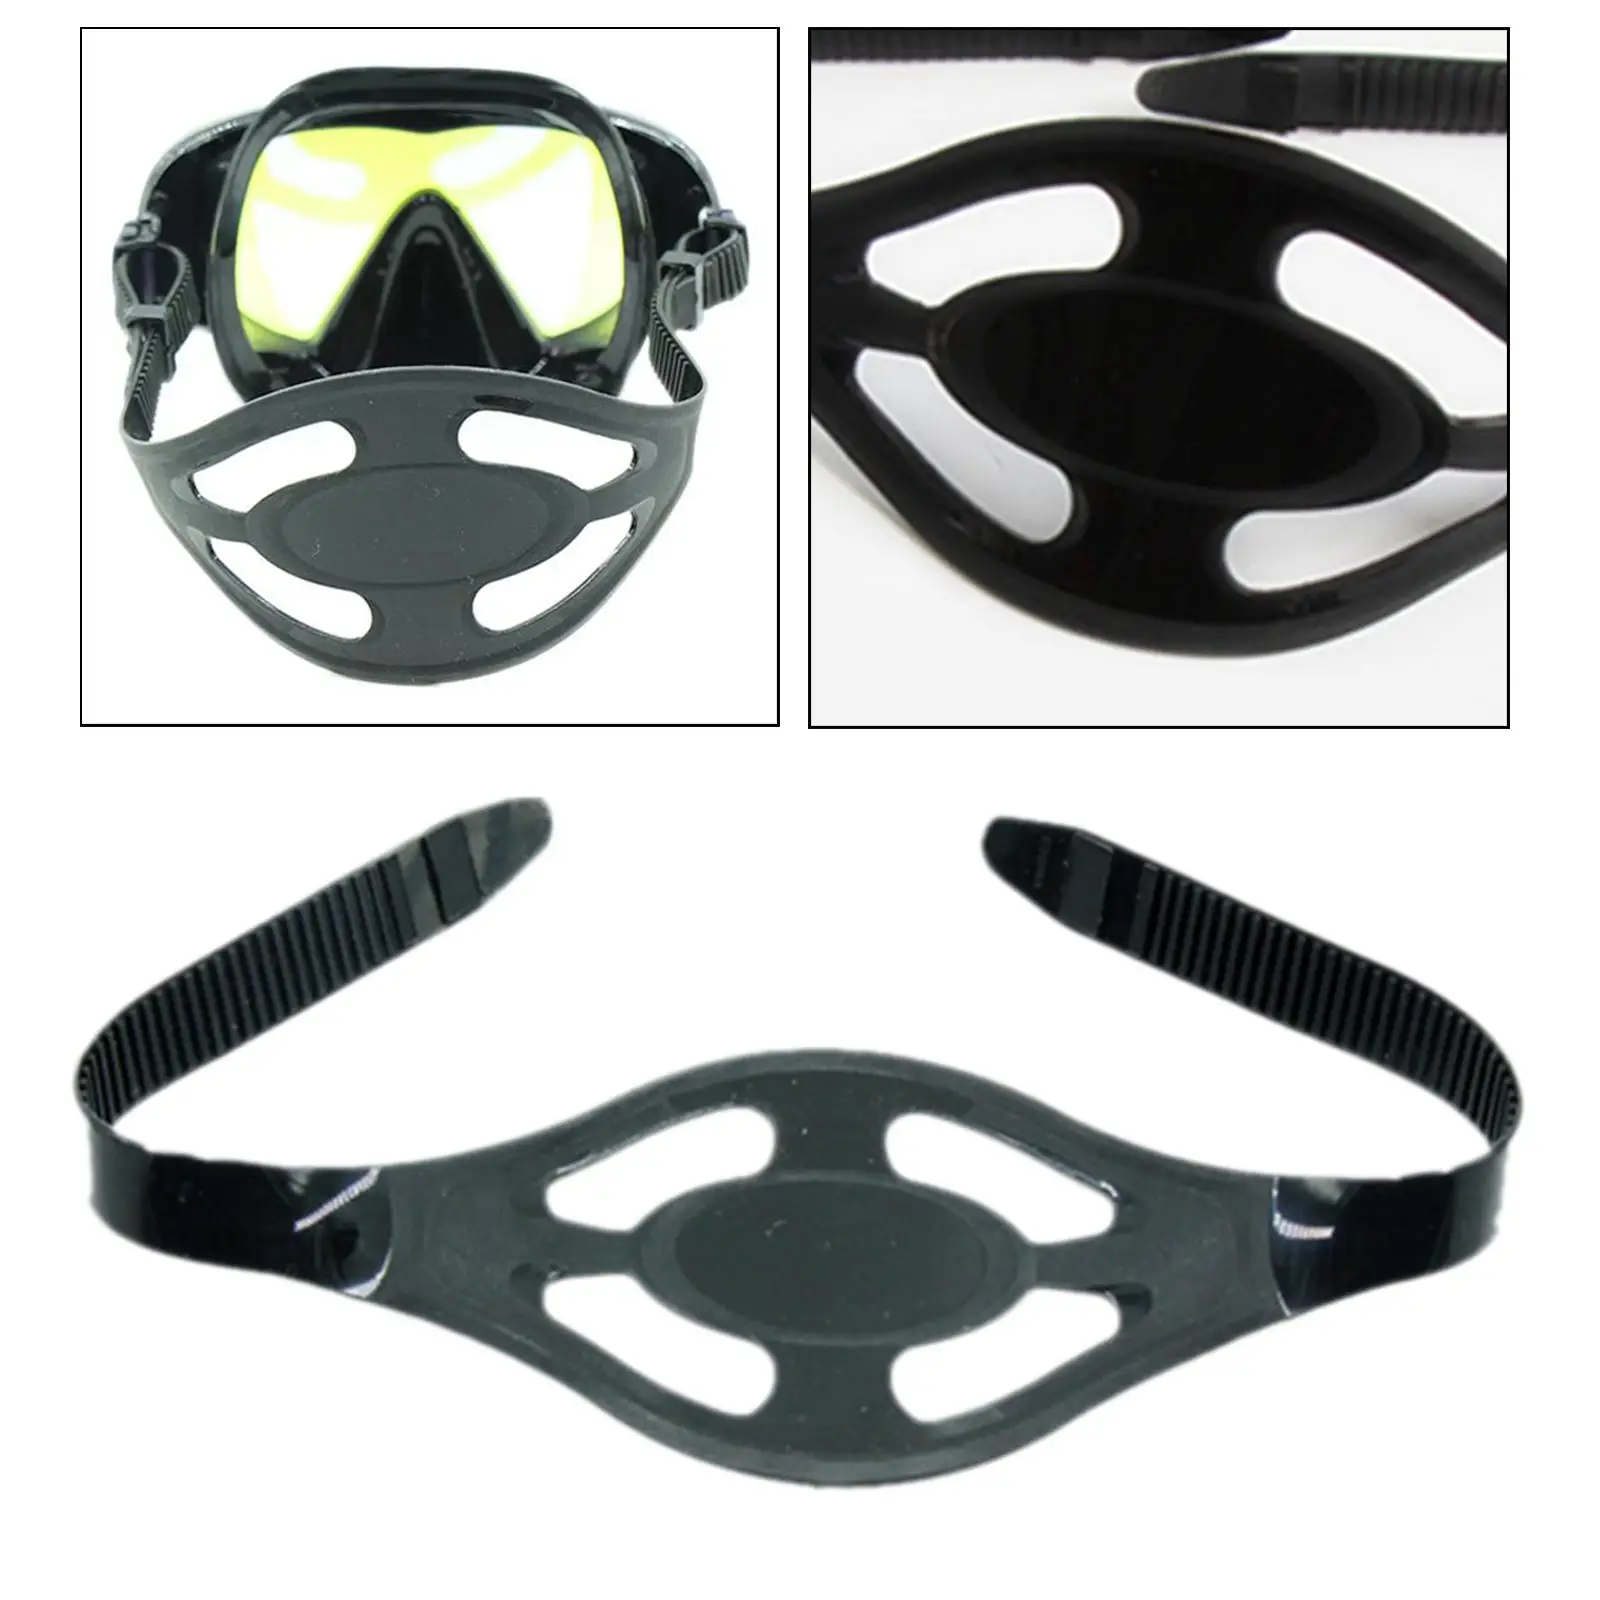 Scuba Diving Comfort Protector Diving Accessories Diving for Outdoor Sports